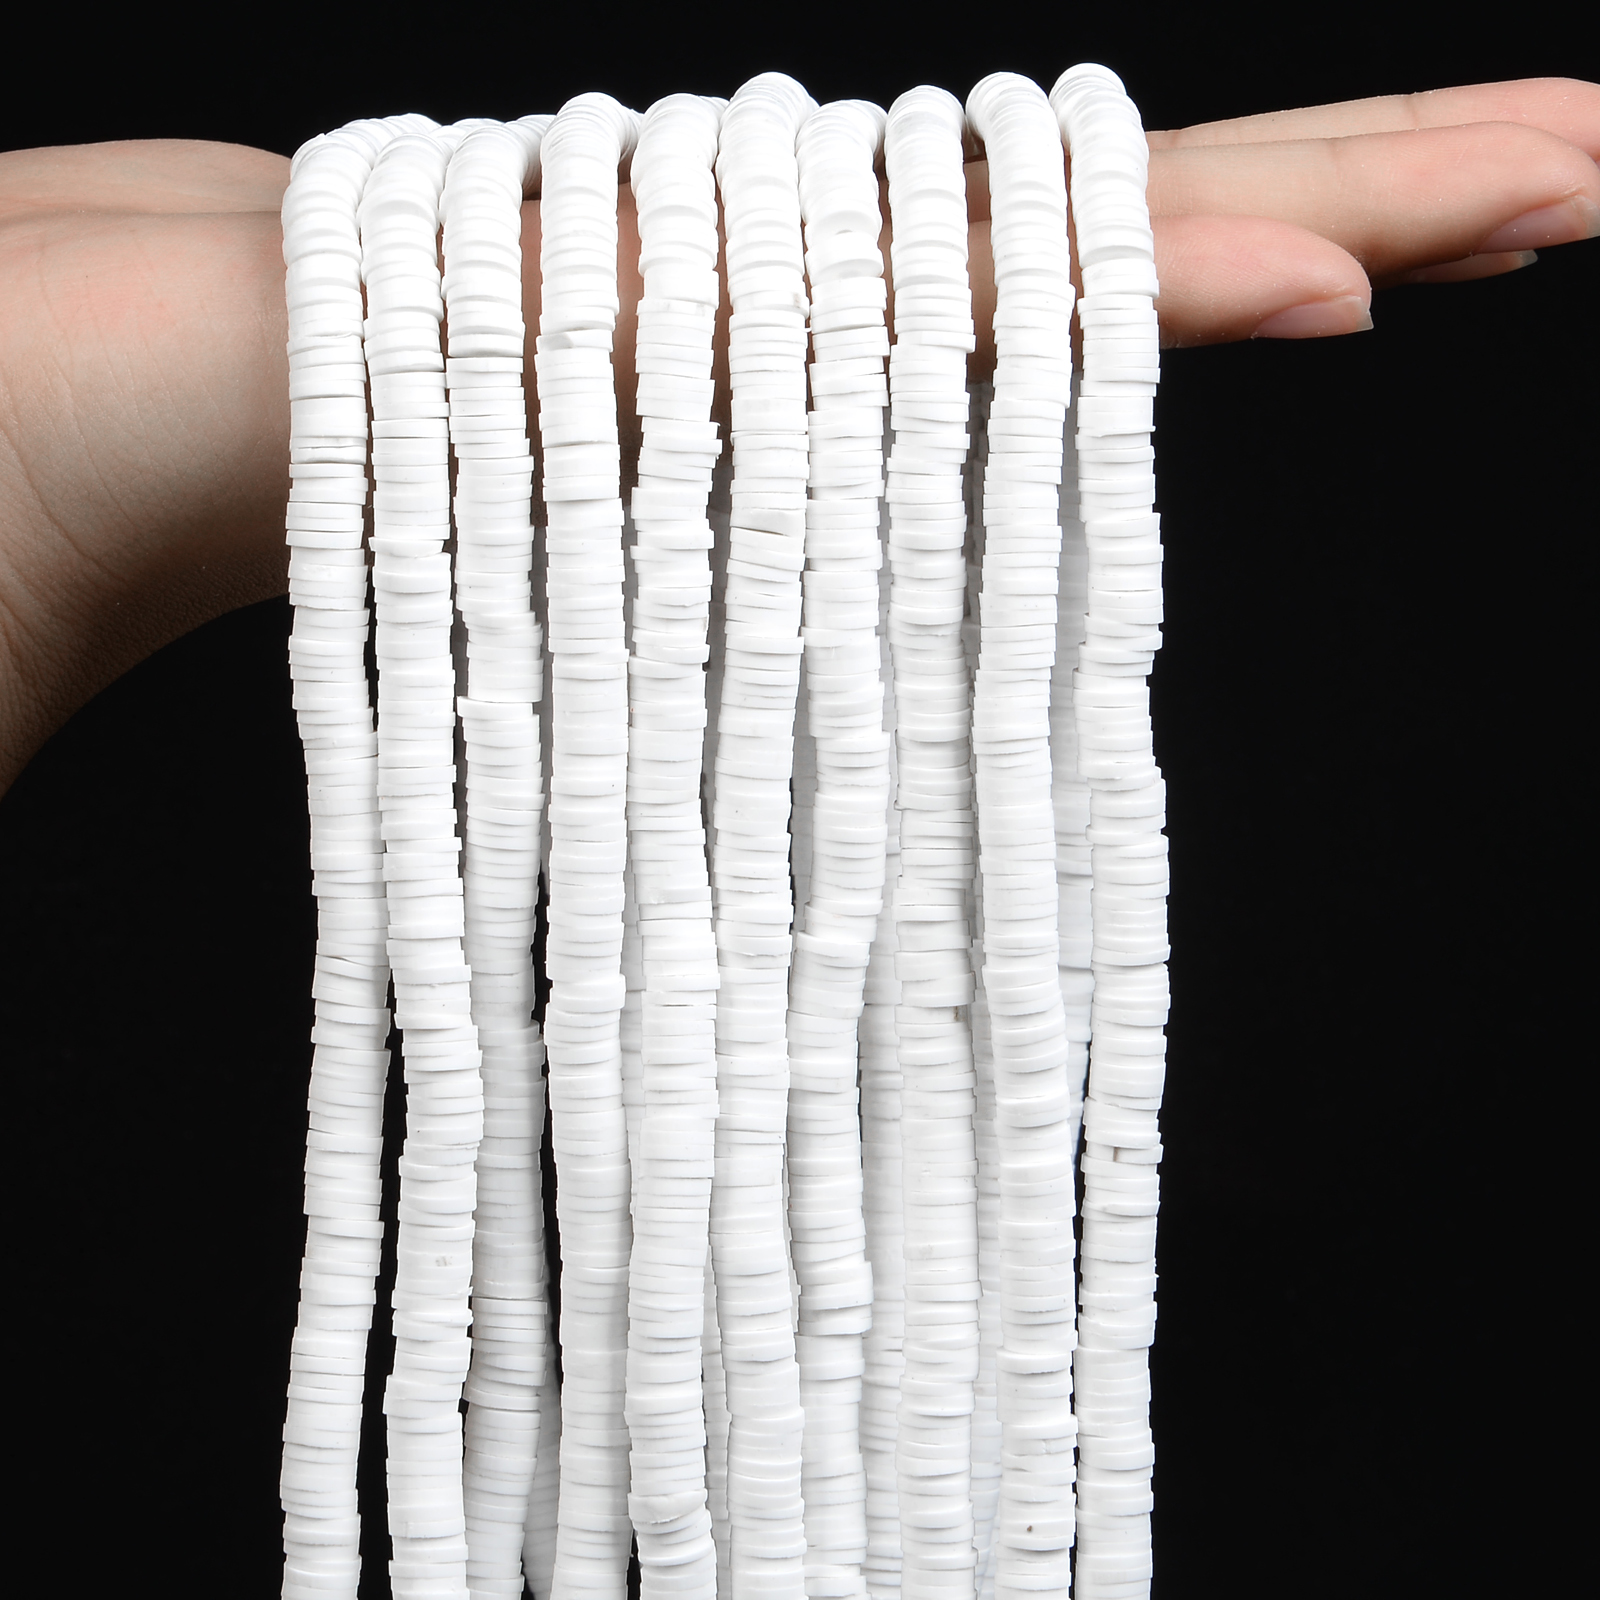 380pcs White Clay Beads Chip Strip 6mm Flat Round Polymer Disk Loose Spacer Heishi Beads for Handmade DIY Jewelry Making Bracelets Flat Polymer Clay